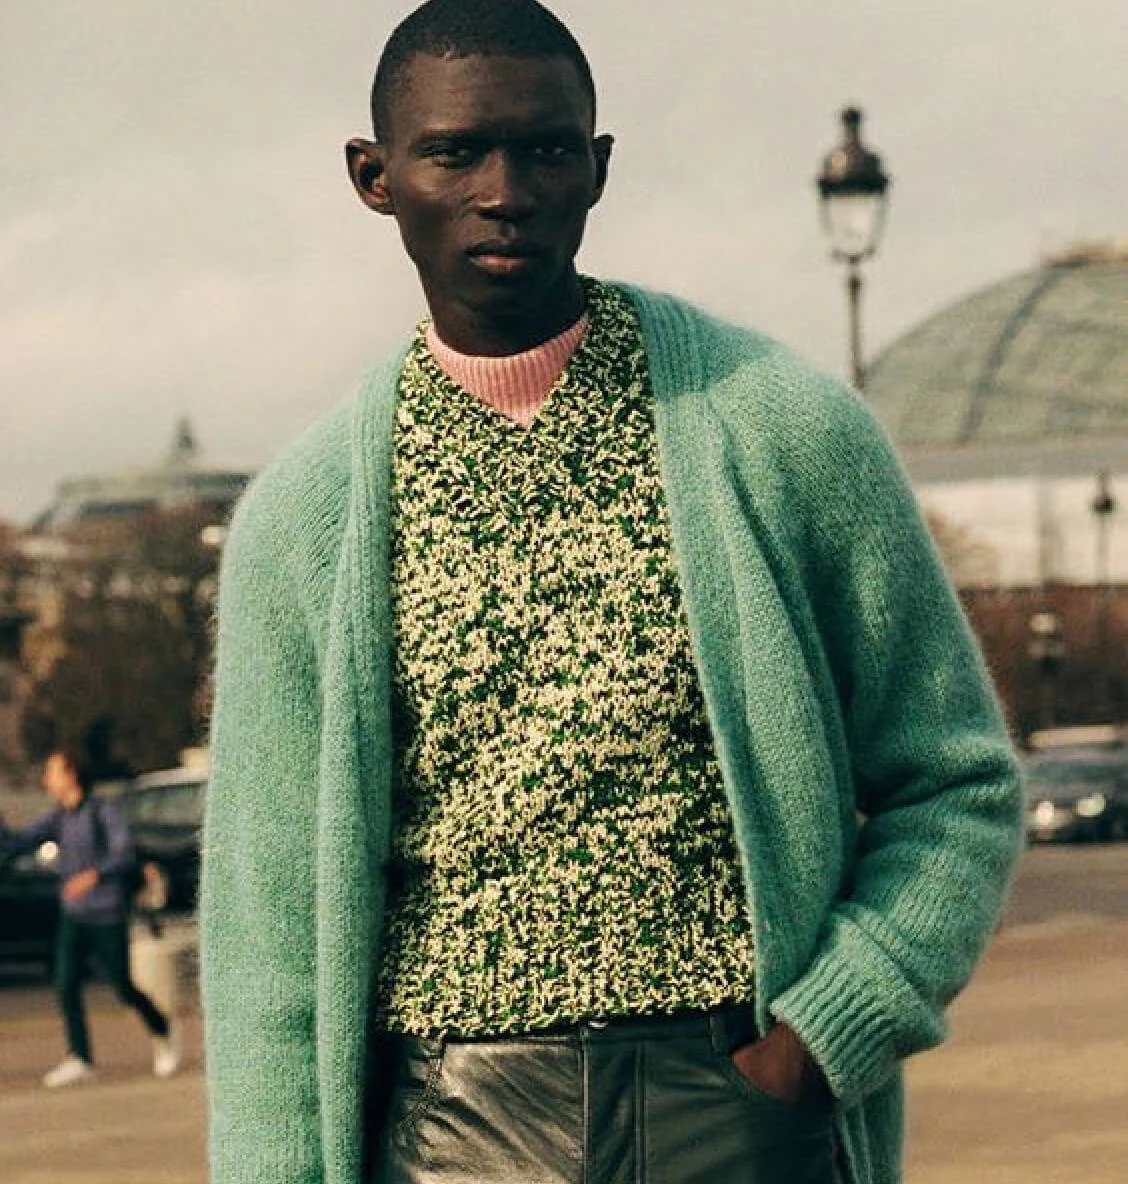 Black man stands on the street wearing leather pants and green cardigan over a green sweater and pink turtleneck. A lamppost, cars and pedestrian are visible in the background.